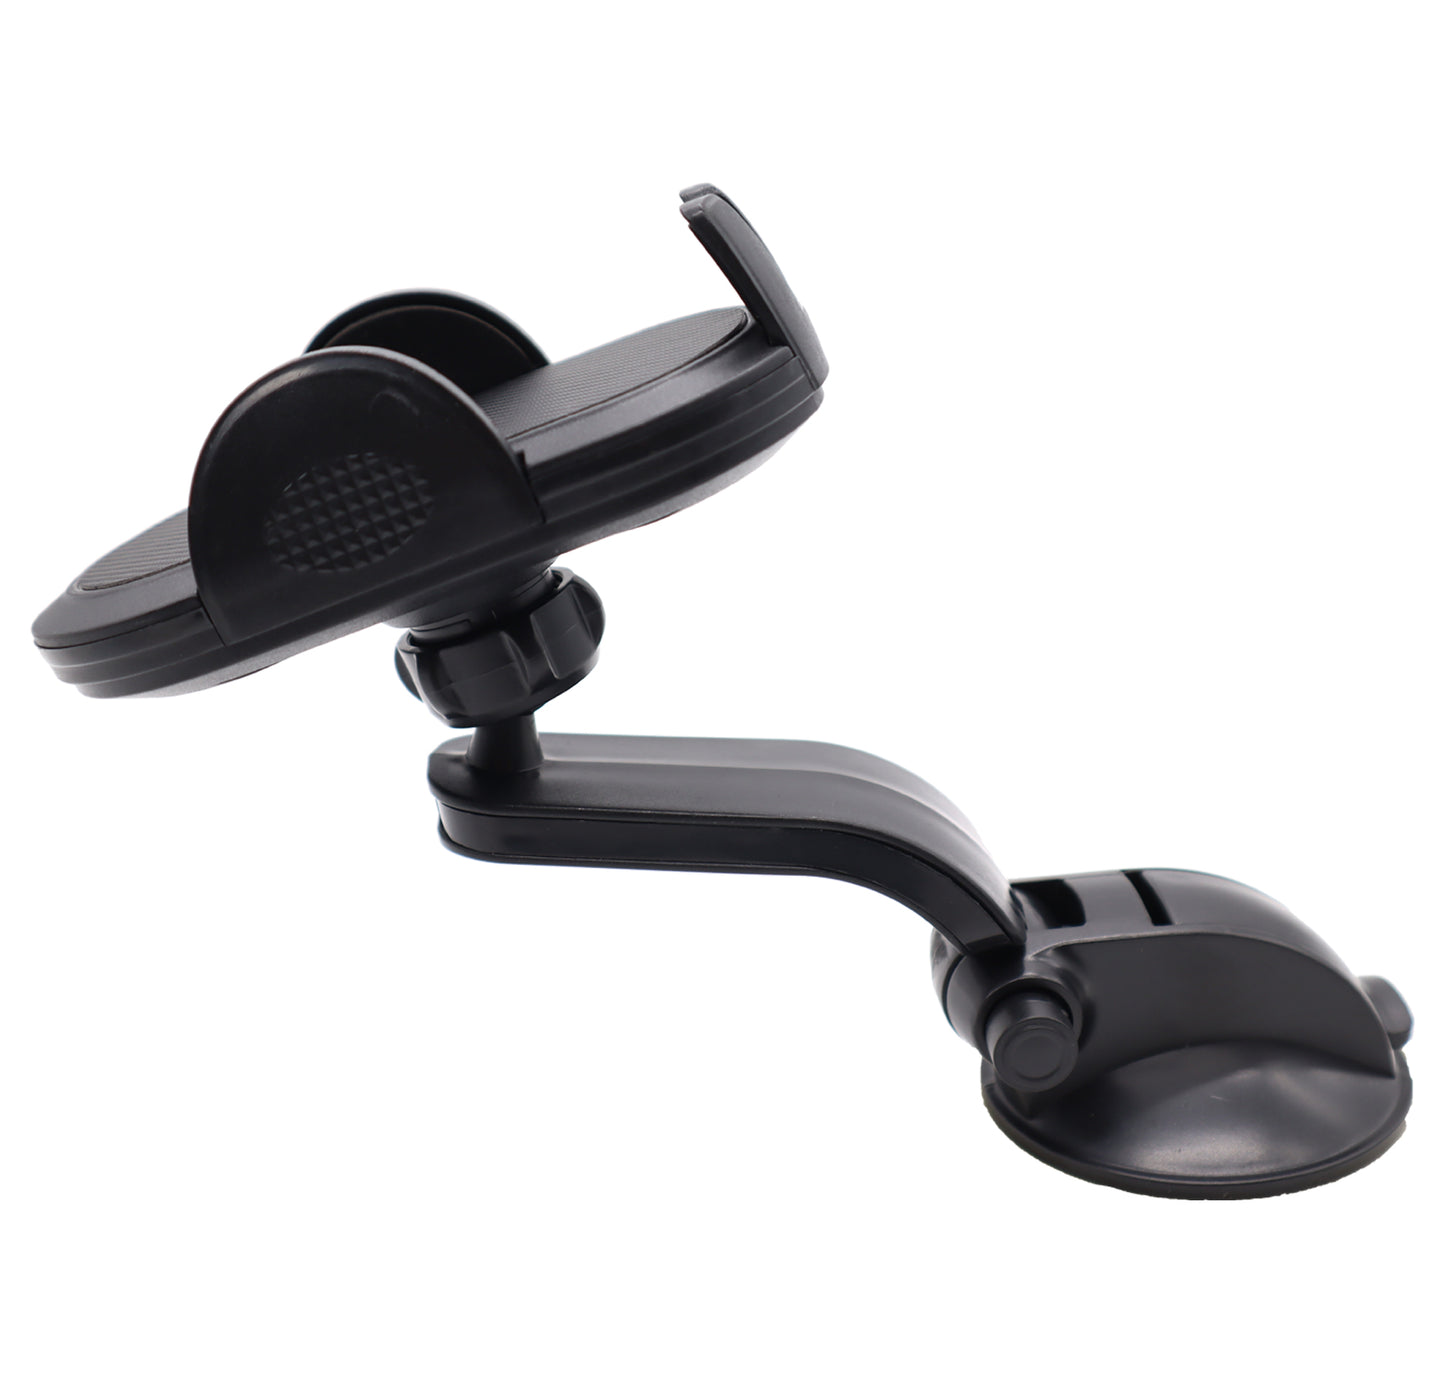 Tech Theory- Adjustable Dashboard Phone Mount (TT-ACDC-01)